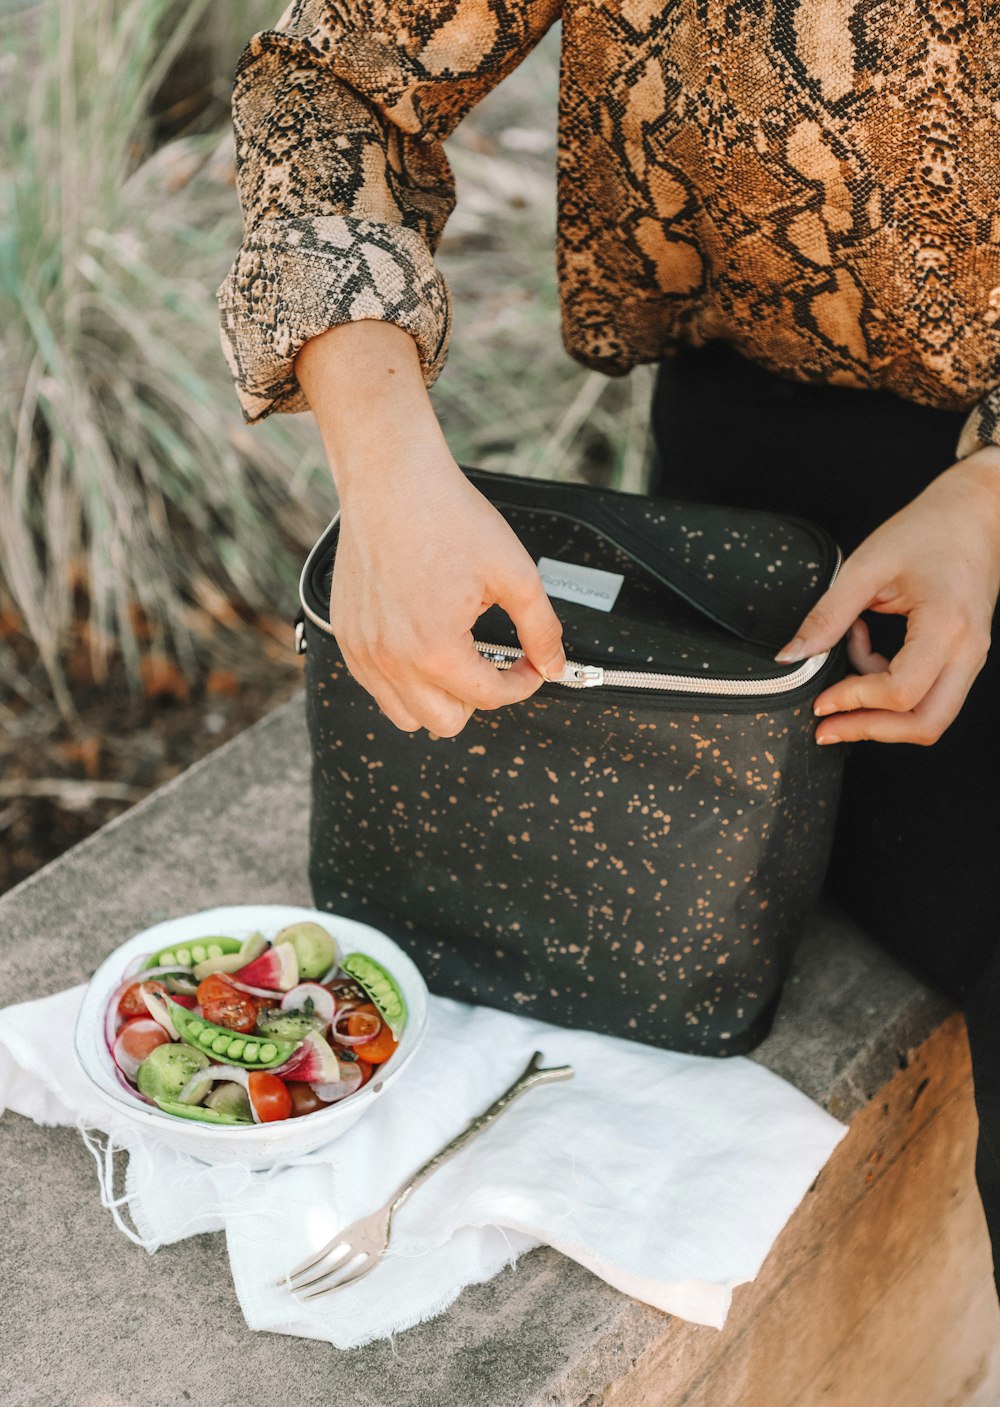 woman opening lunch bag near bowl of salad